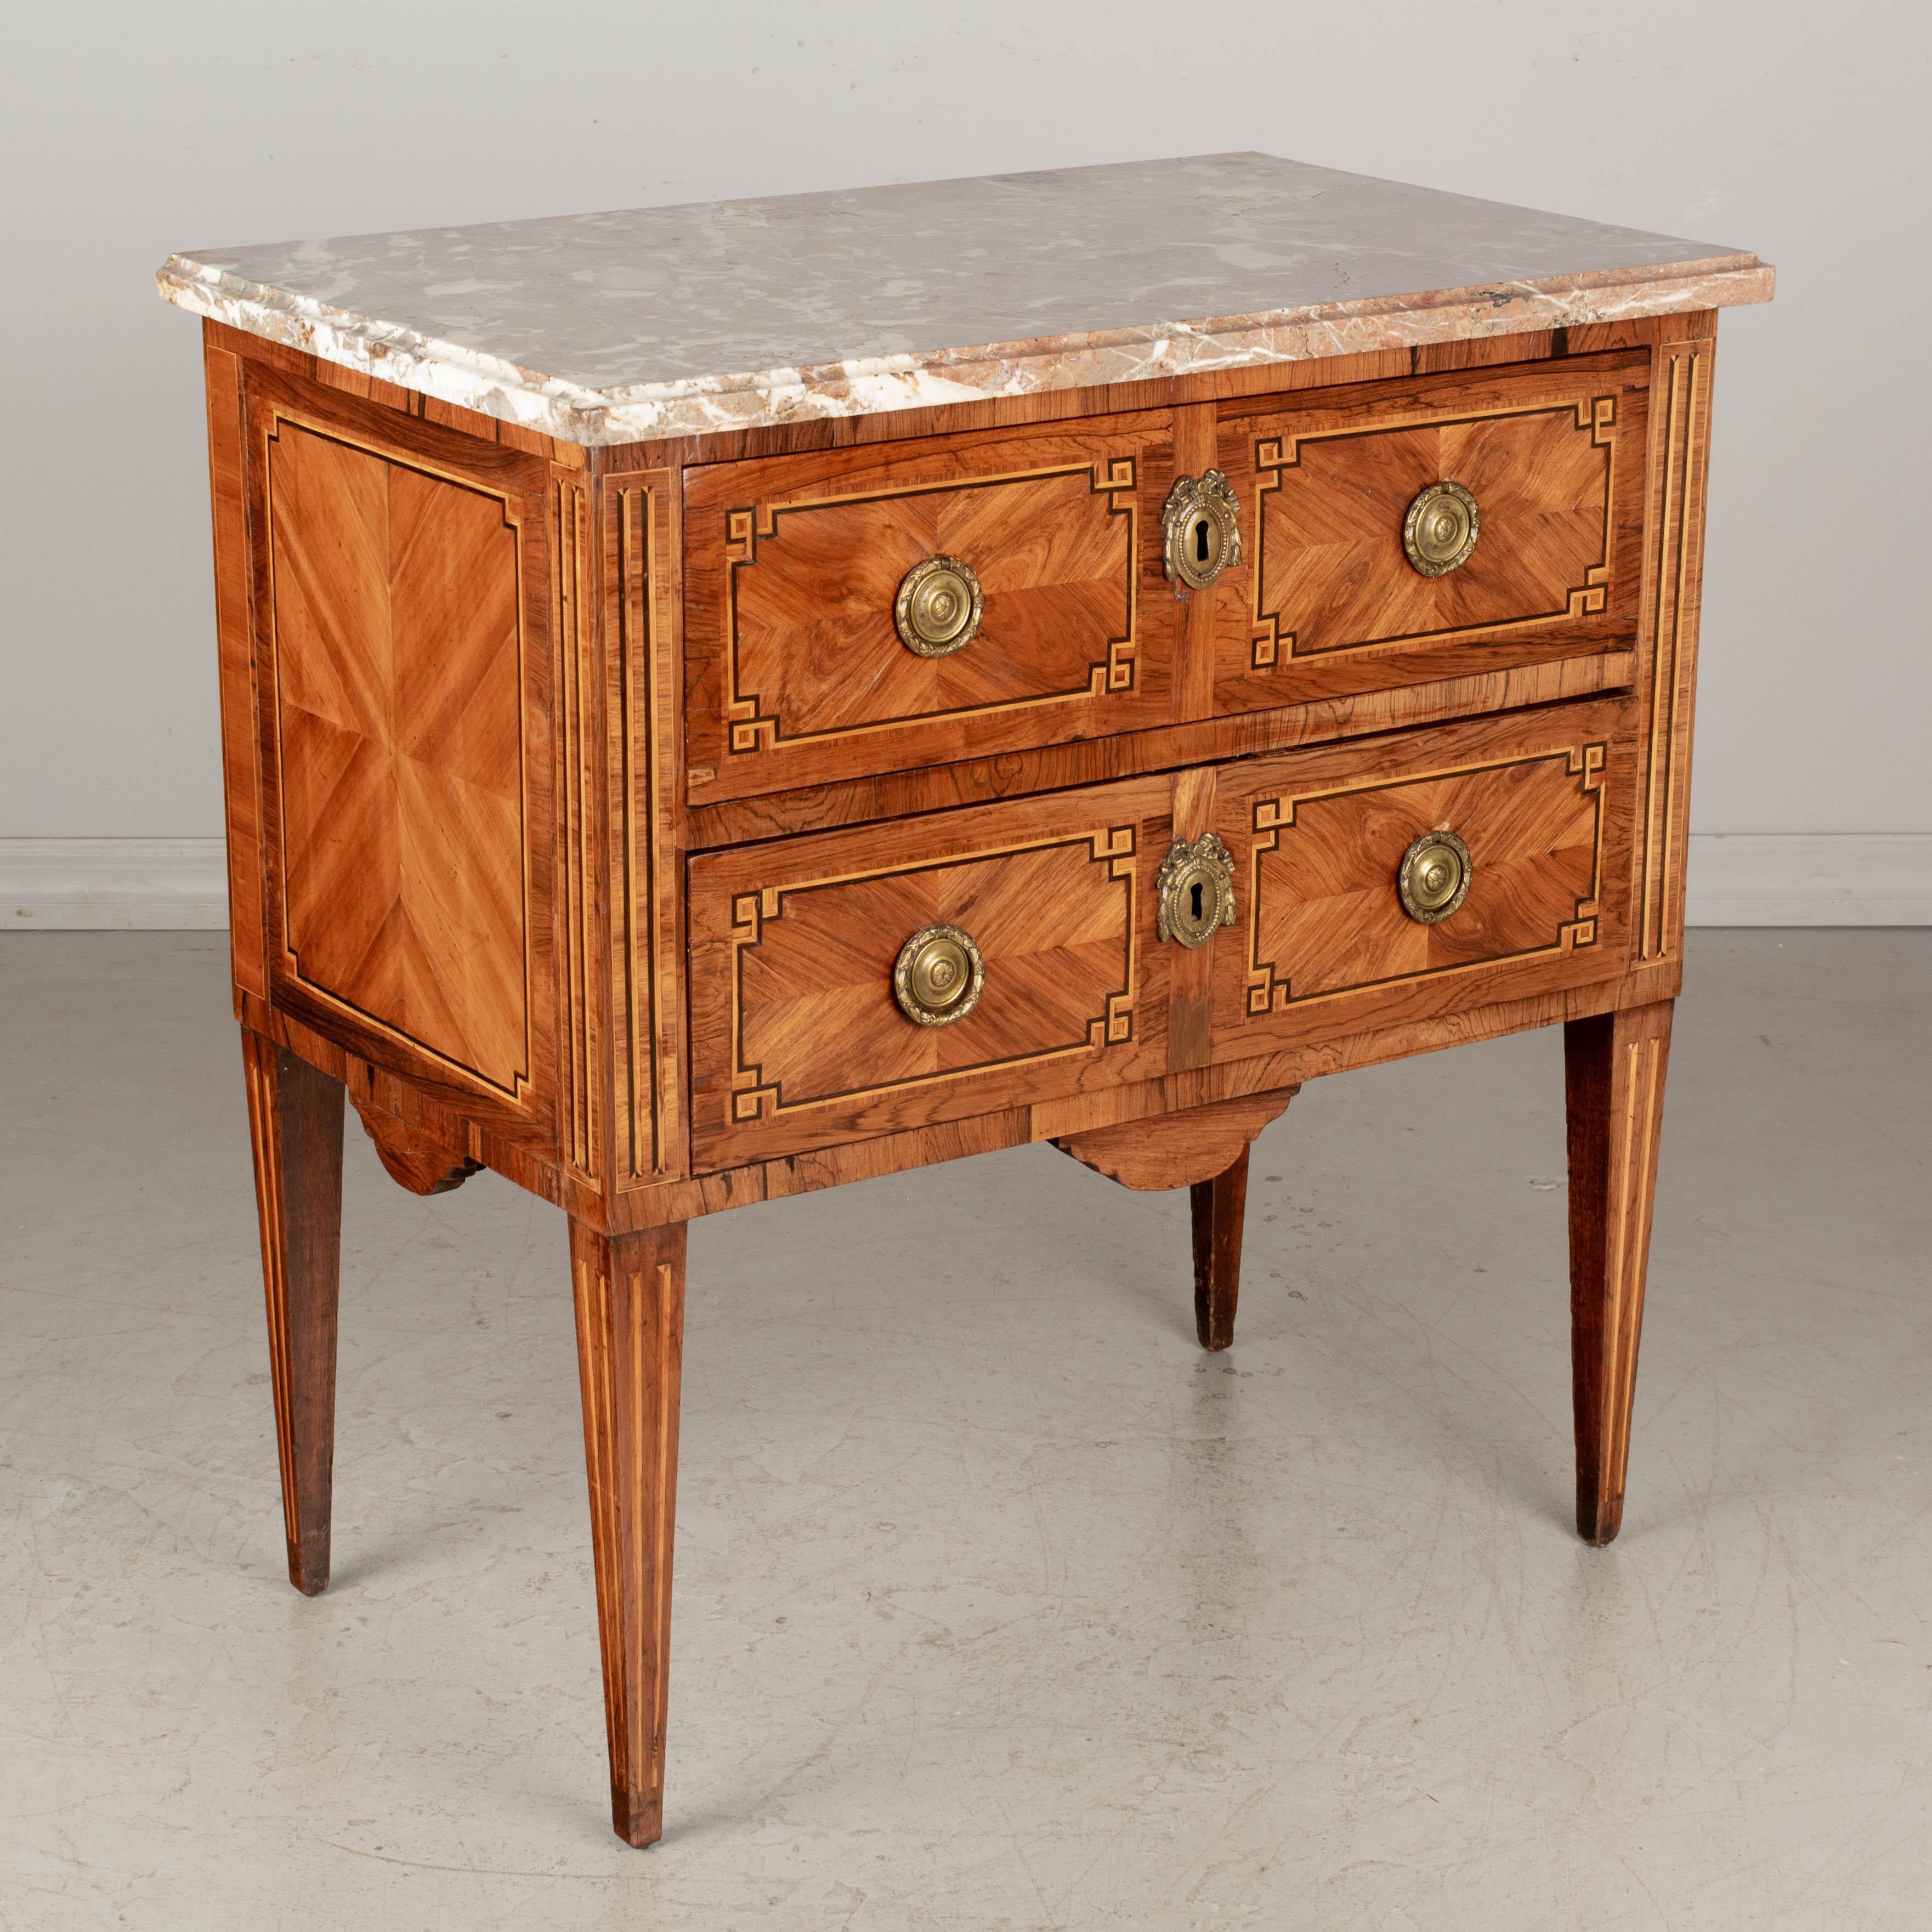 An 18th century French Louis XVI marquetry commode inlaid with veneers of mahogany, walnut and rosewood. Original Languedoc marble top. Two dovetailed drawers with original cast bronze hardware. Locks are present, but no keys. Slender tapered legs. 